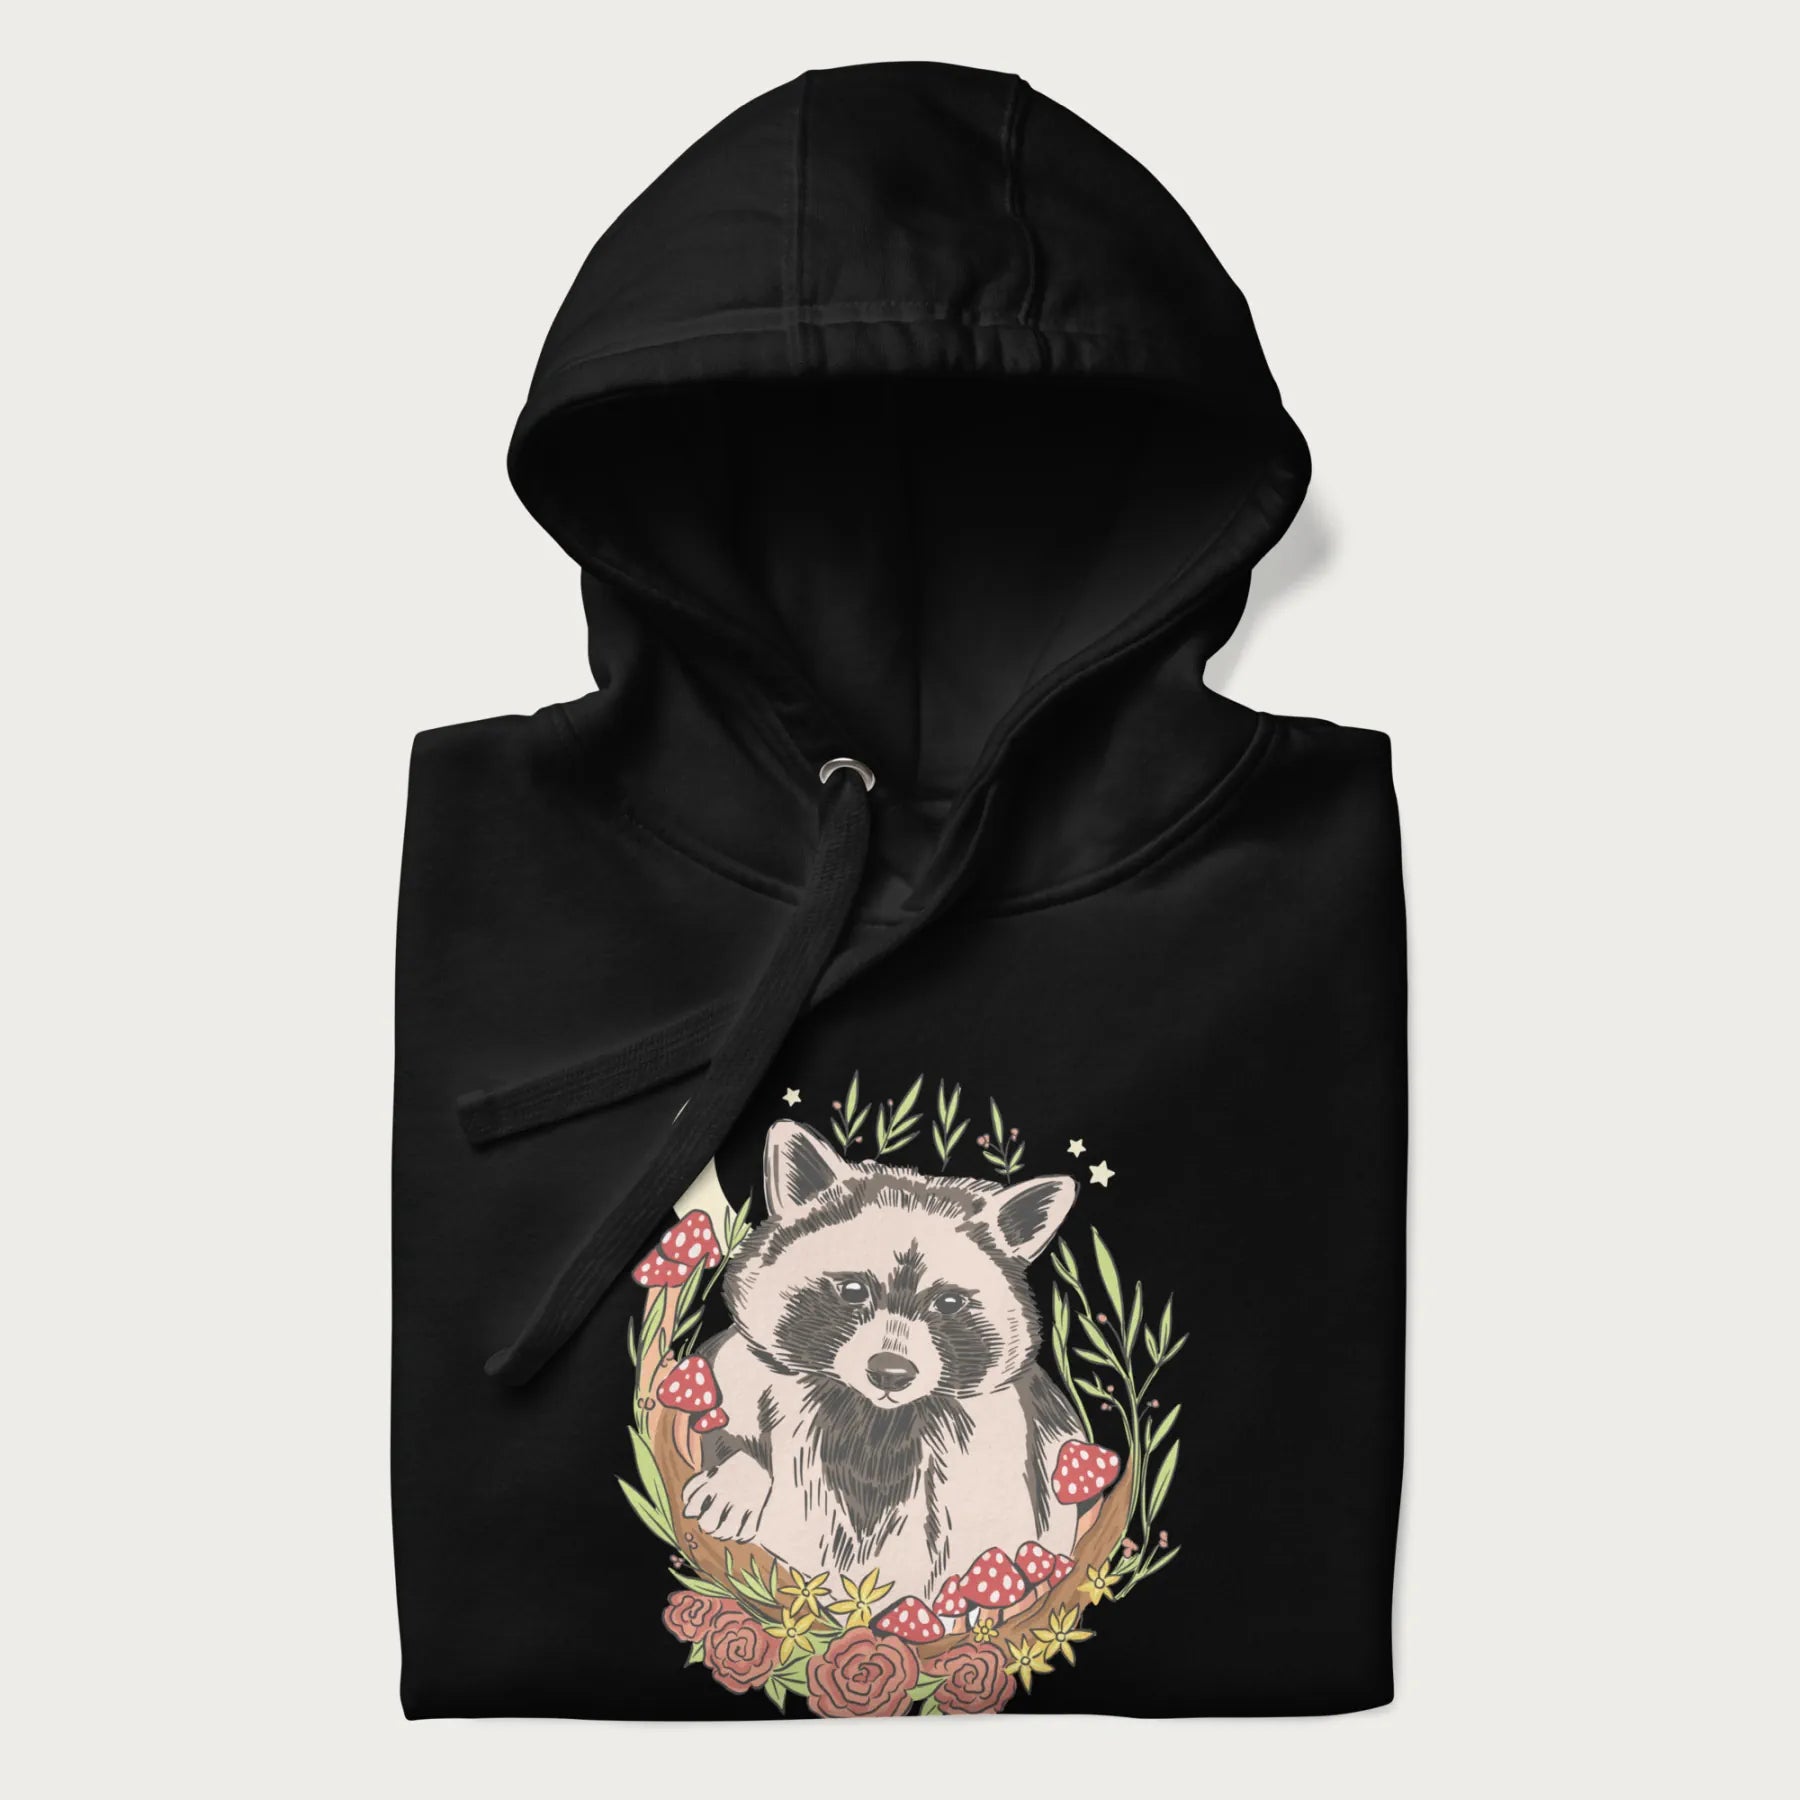 Folded black hoodie with graphic of an adorable raccoon surrounded by mushrooms, foliage, and a crescent moon with stars in the background.